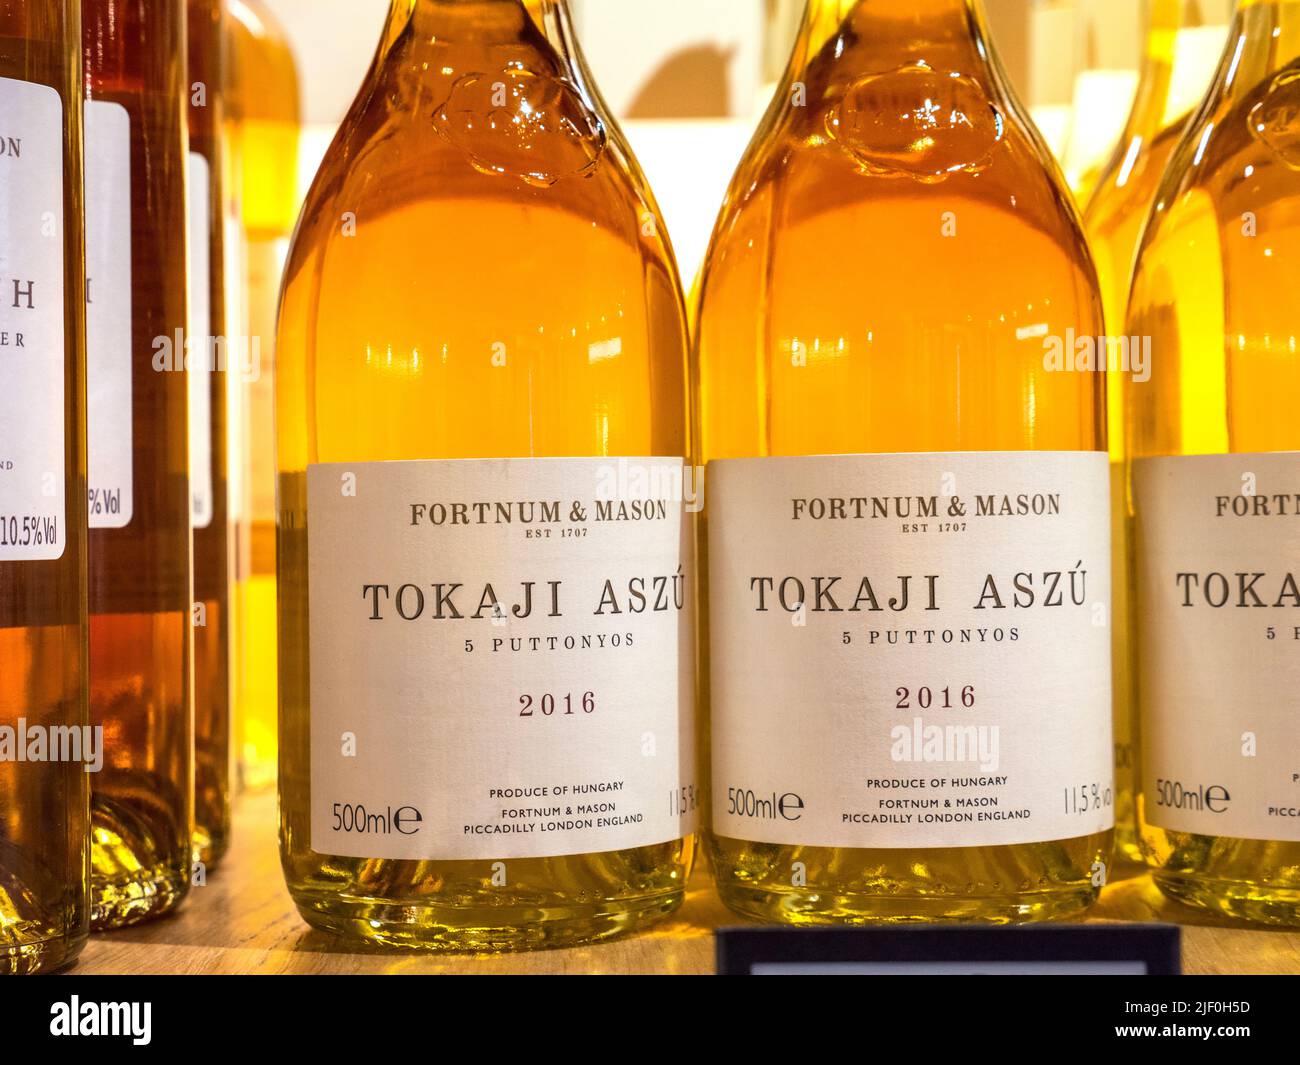 TOKAJI ASZU Fortnum & Mason branded Tokaji Aszú Hungarian off dry sweet white wine 2016 on display for sale at Fortnum & Mason Food Hall Wine Department. It is produced by Pajzos Tokaj, one of the great producers of the region. It is made by blending hand-picked shrivelled berries with top quality base wines. 5 puttonyos denotes the sweetness. Traditionally paired with blue cheese, pate and dessert. Fortnum & Mason Food Hall Wine Department, Piccadilly St. James's, London W1A 1ER Stock Photo